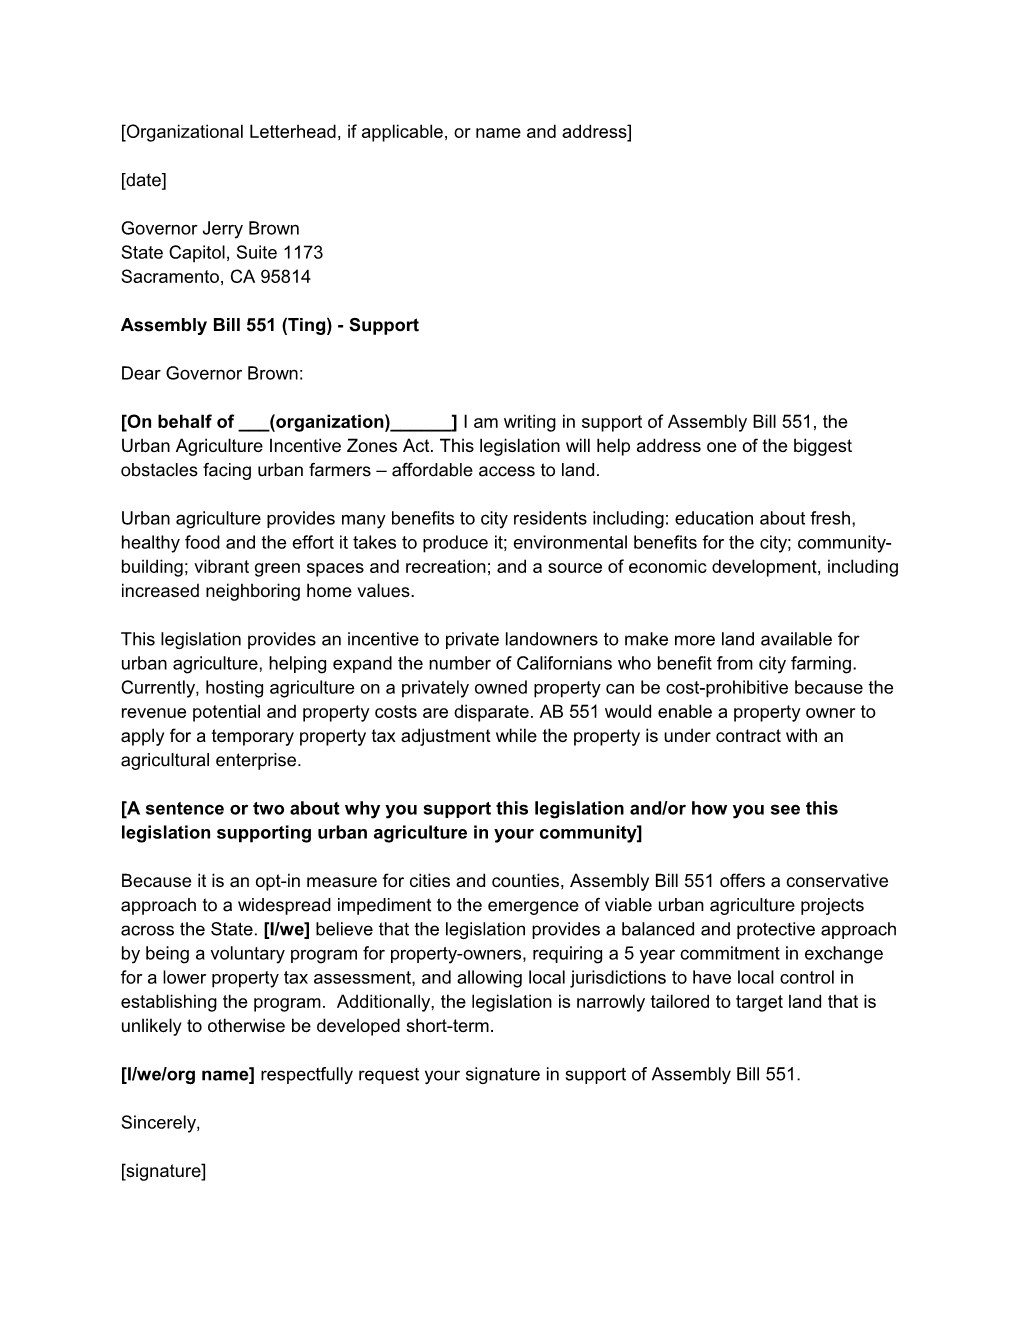 Urban Ag Incentive Zone - Sample Support Letter - Organizers Copy